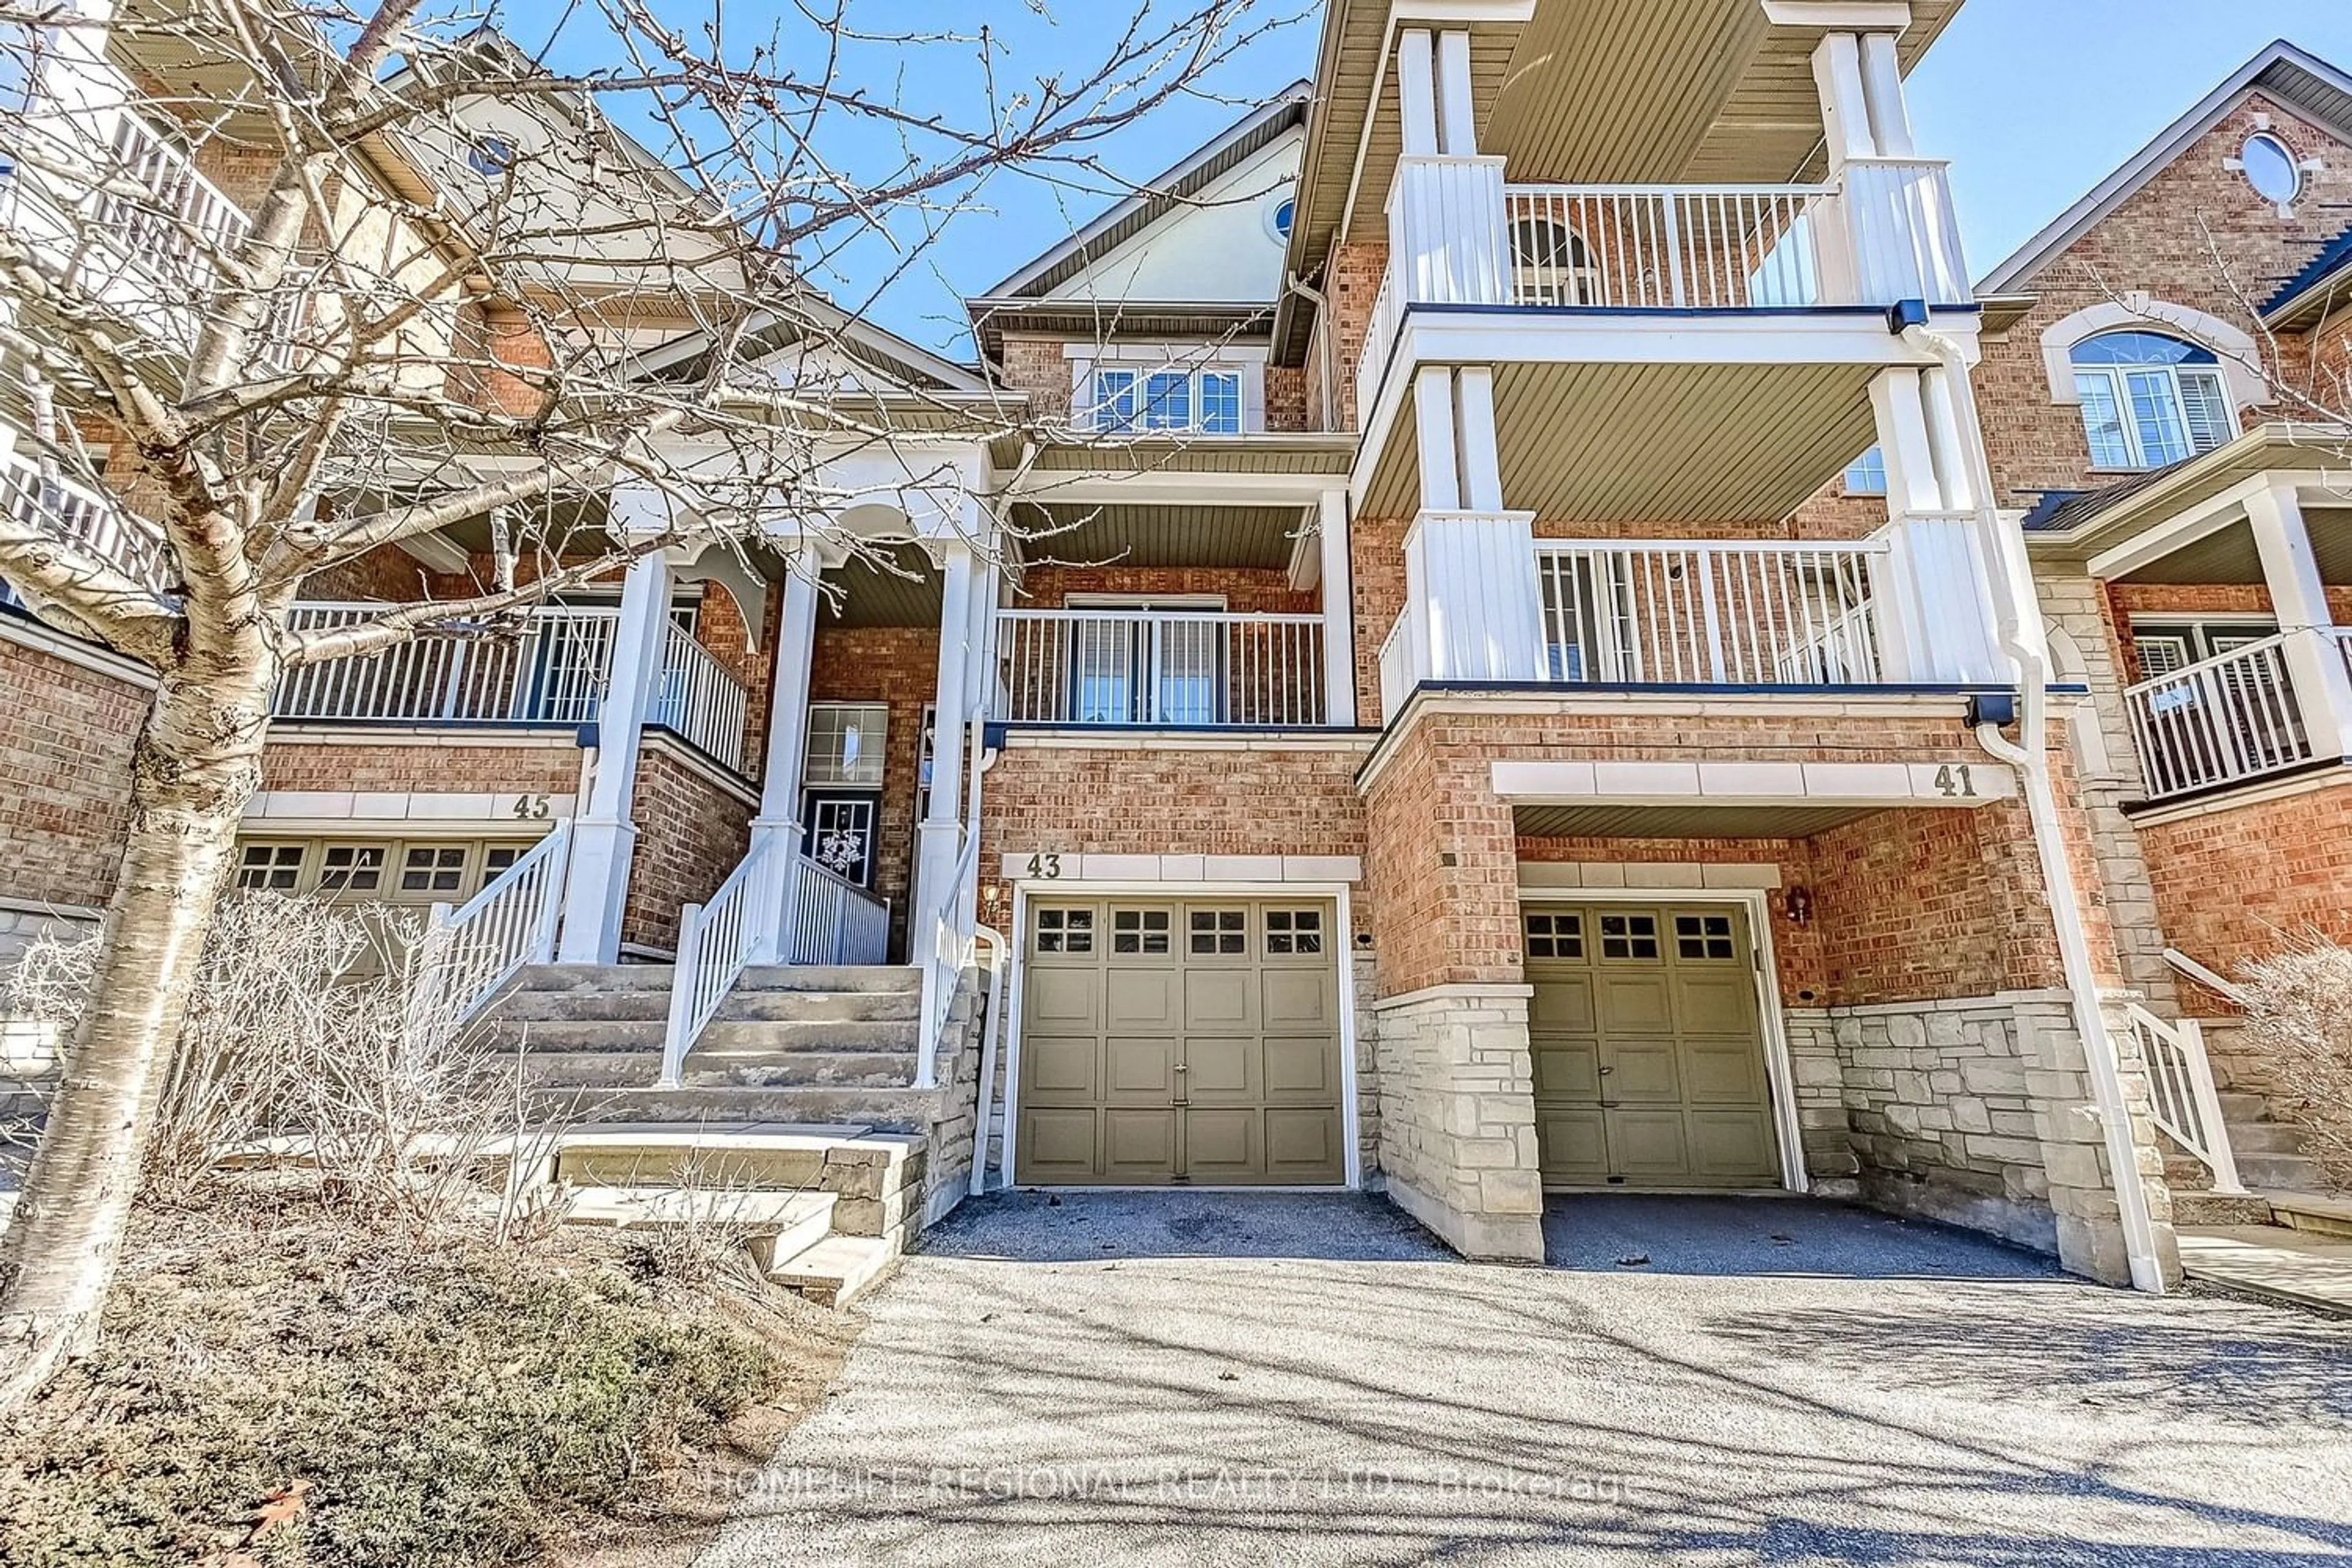 A pic from exterior of the house or condo for 601 Shoreline Dr #43, Mississauga Ontario L5B 4K7